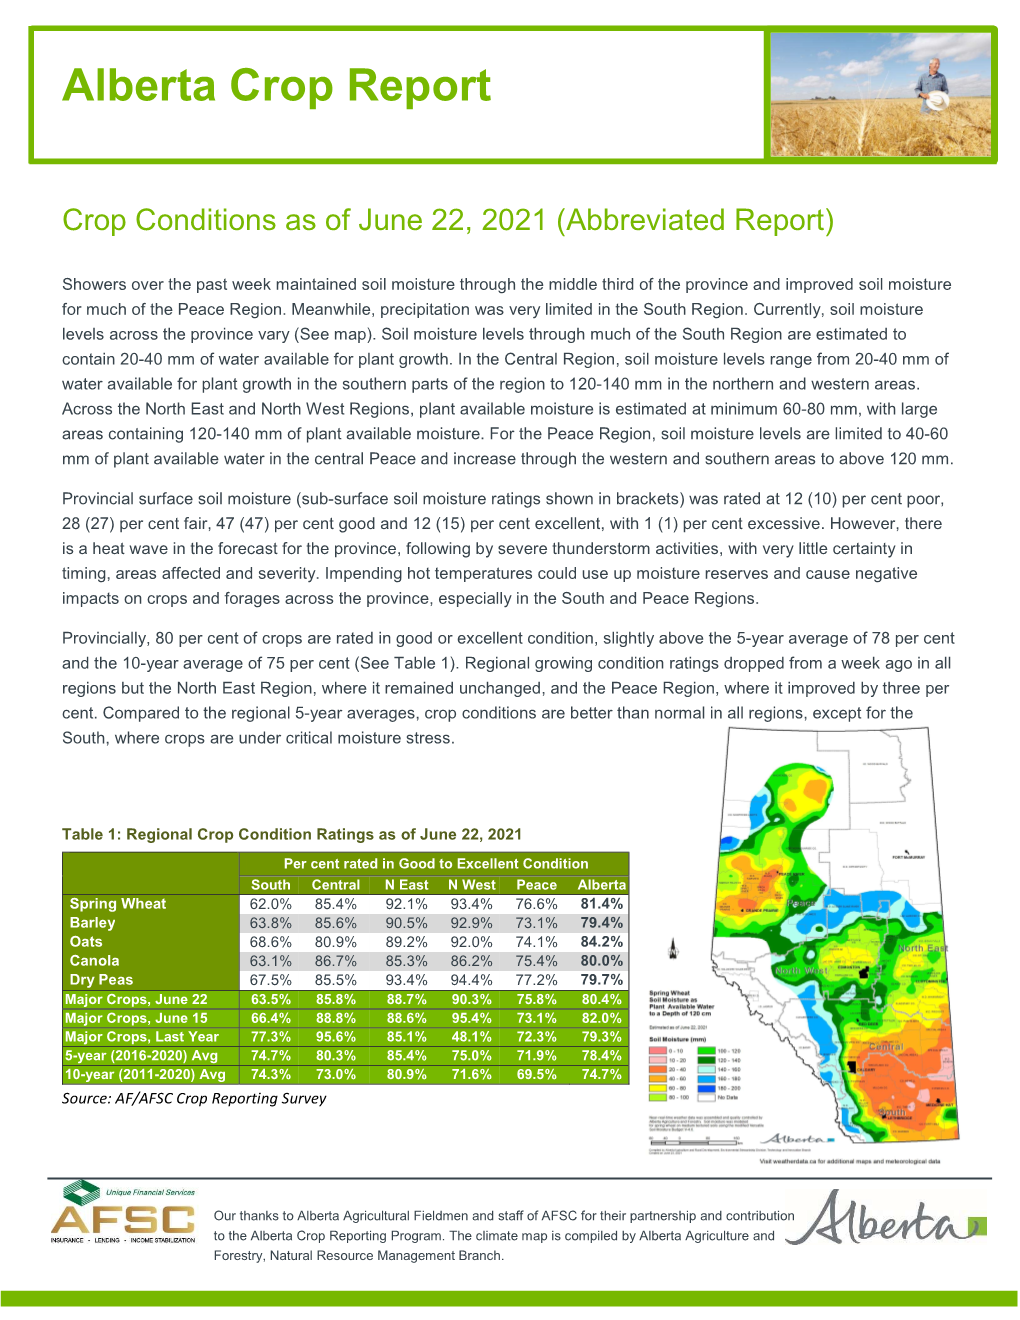 Crop Conditions As of June 22, 2021 (Abbreviated Report)